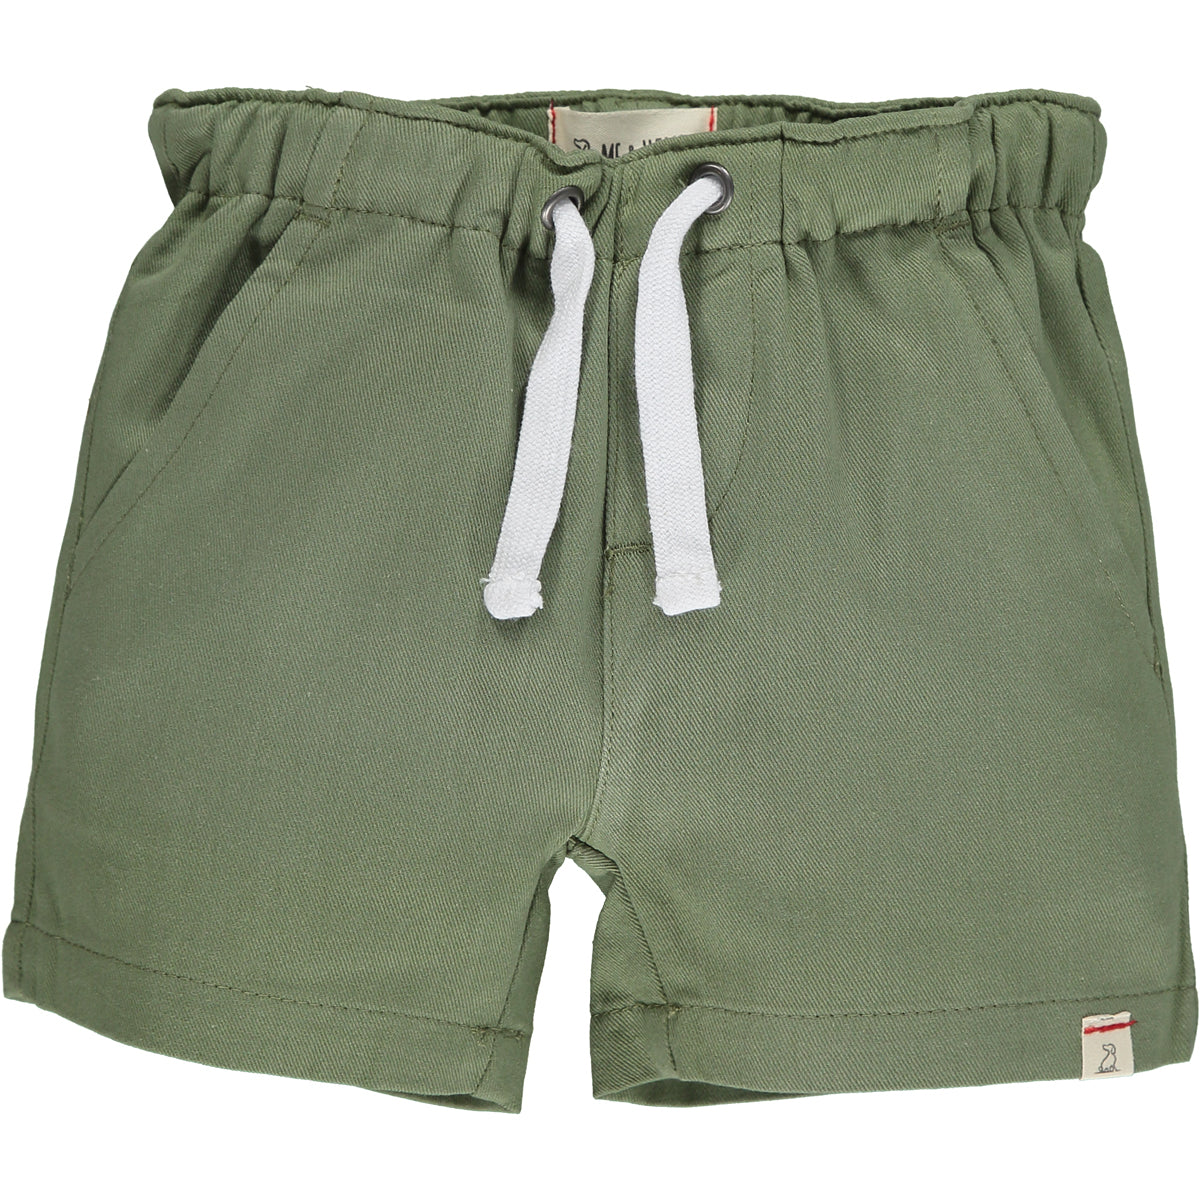 Twill Shorts (various colors)